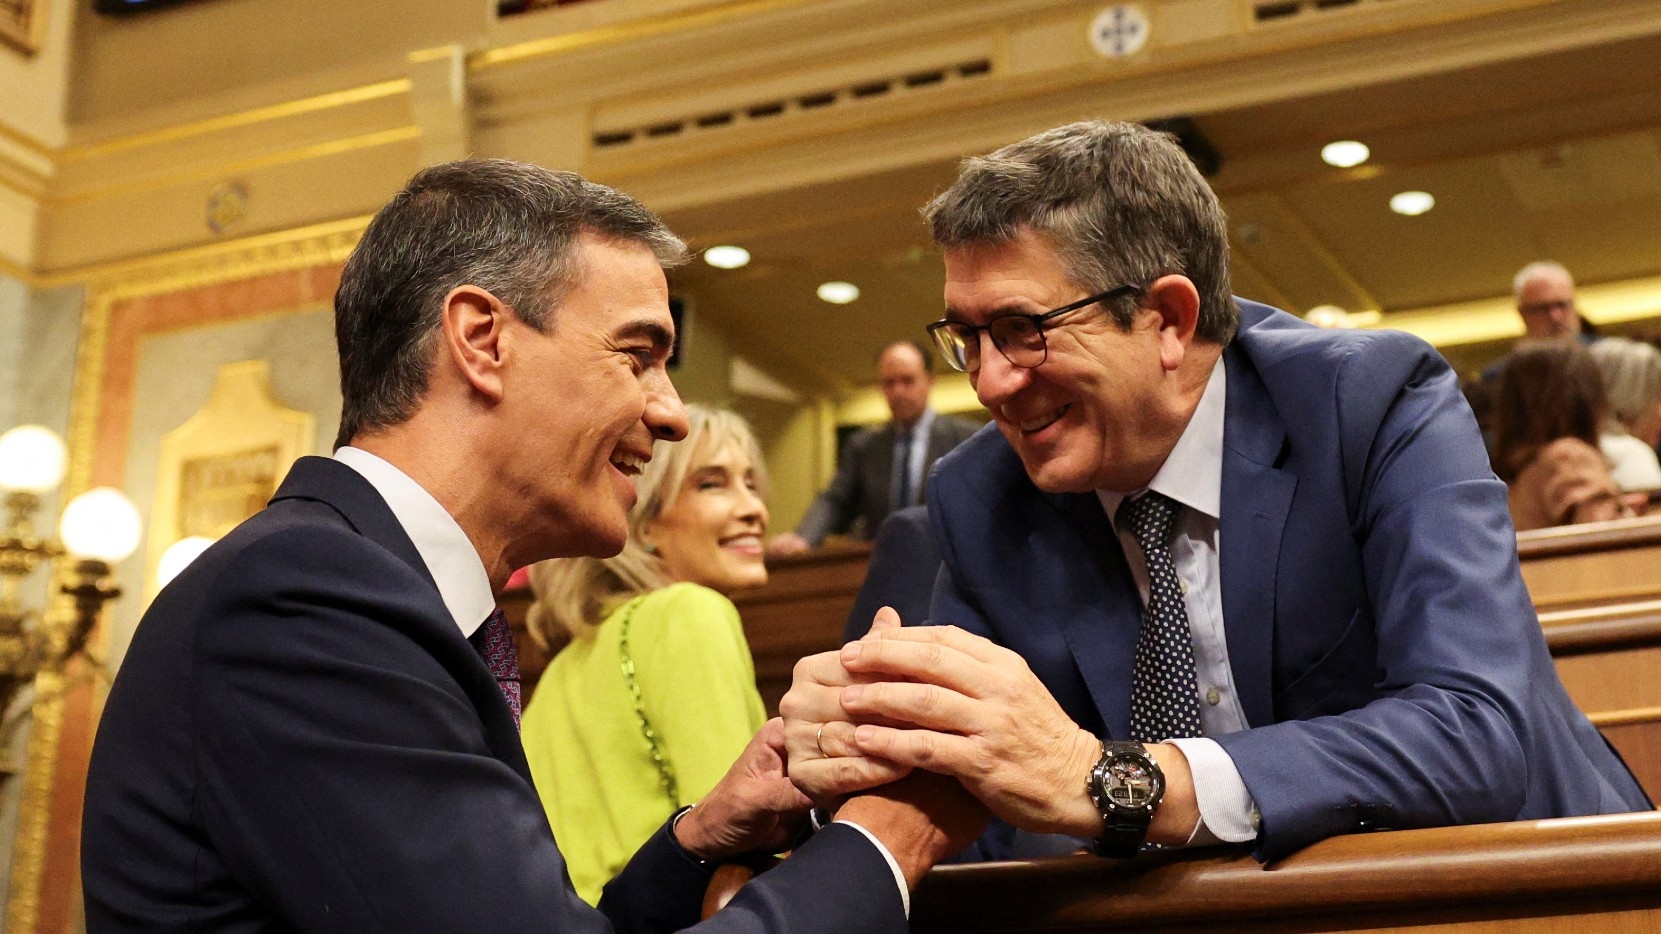 Spanish Prime Minister Pedro Sanchez interacts with Patxi Lopez, member of the Spanish Socialist party PSOE, during a plenary session of the lower house of the Spanish parliament, in Madrid, Spain, 22 May 2024 (Reuters)